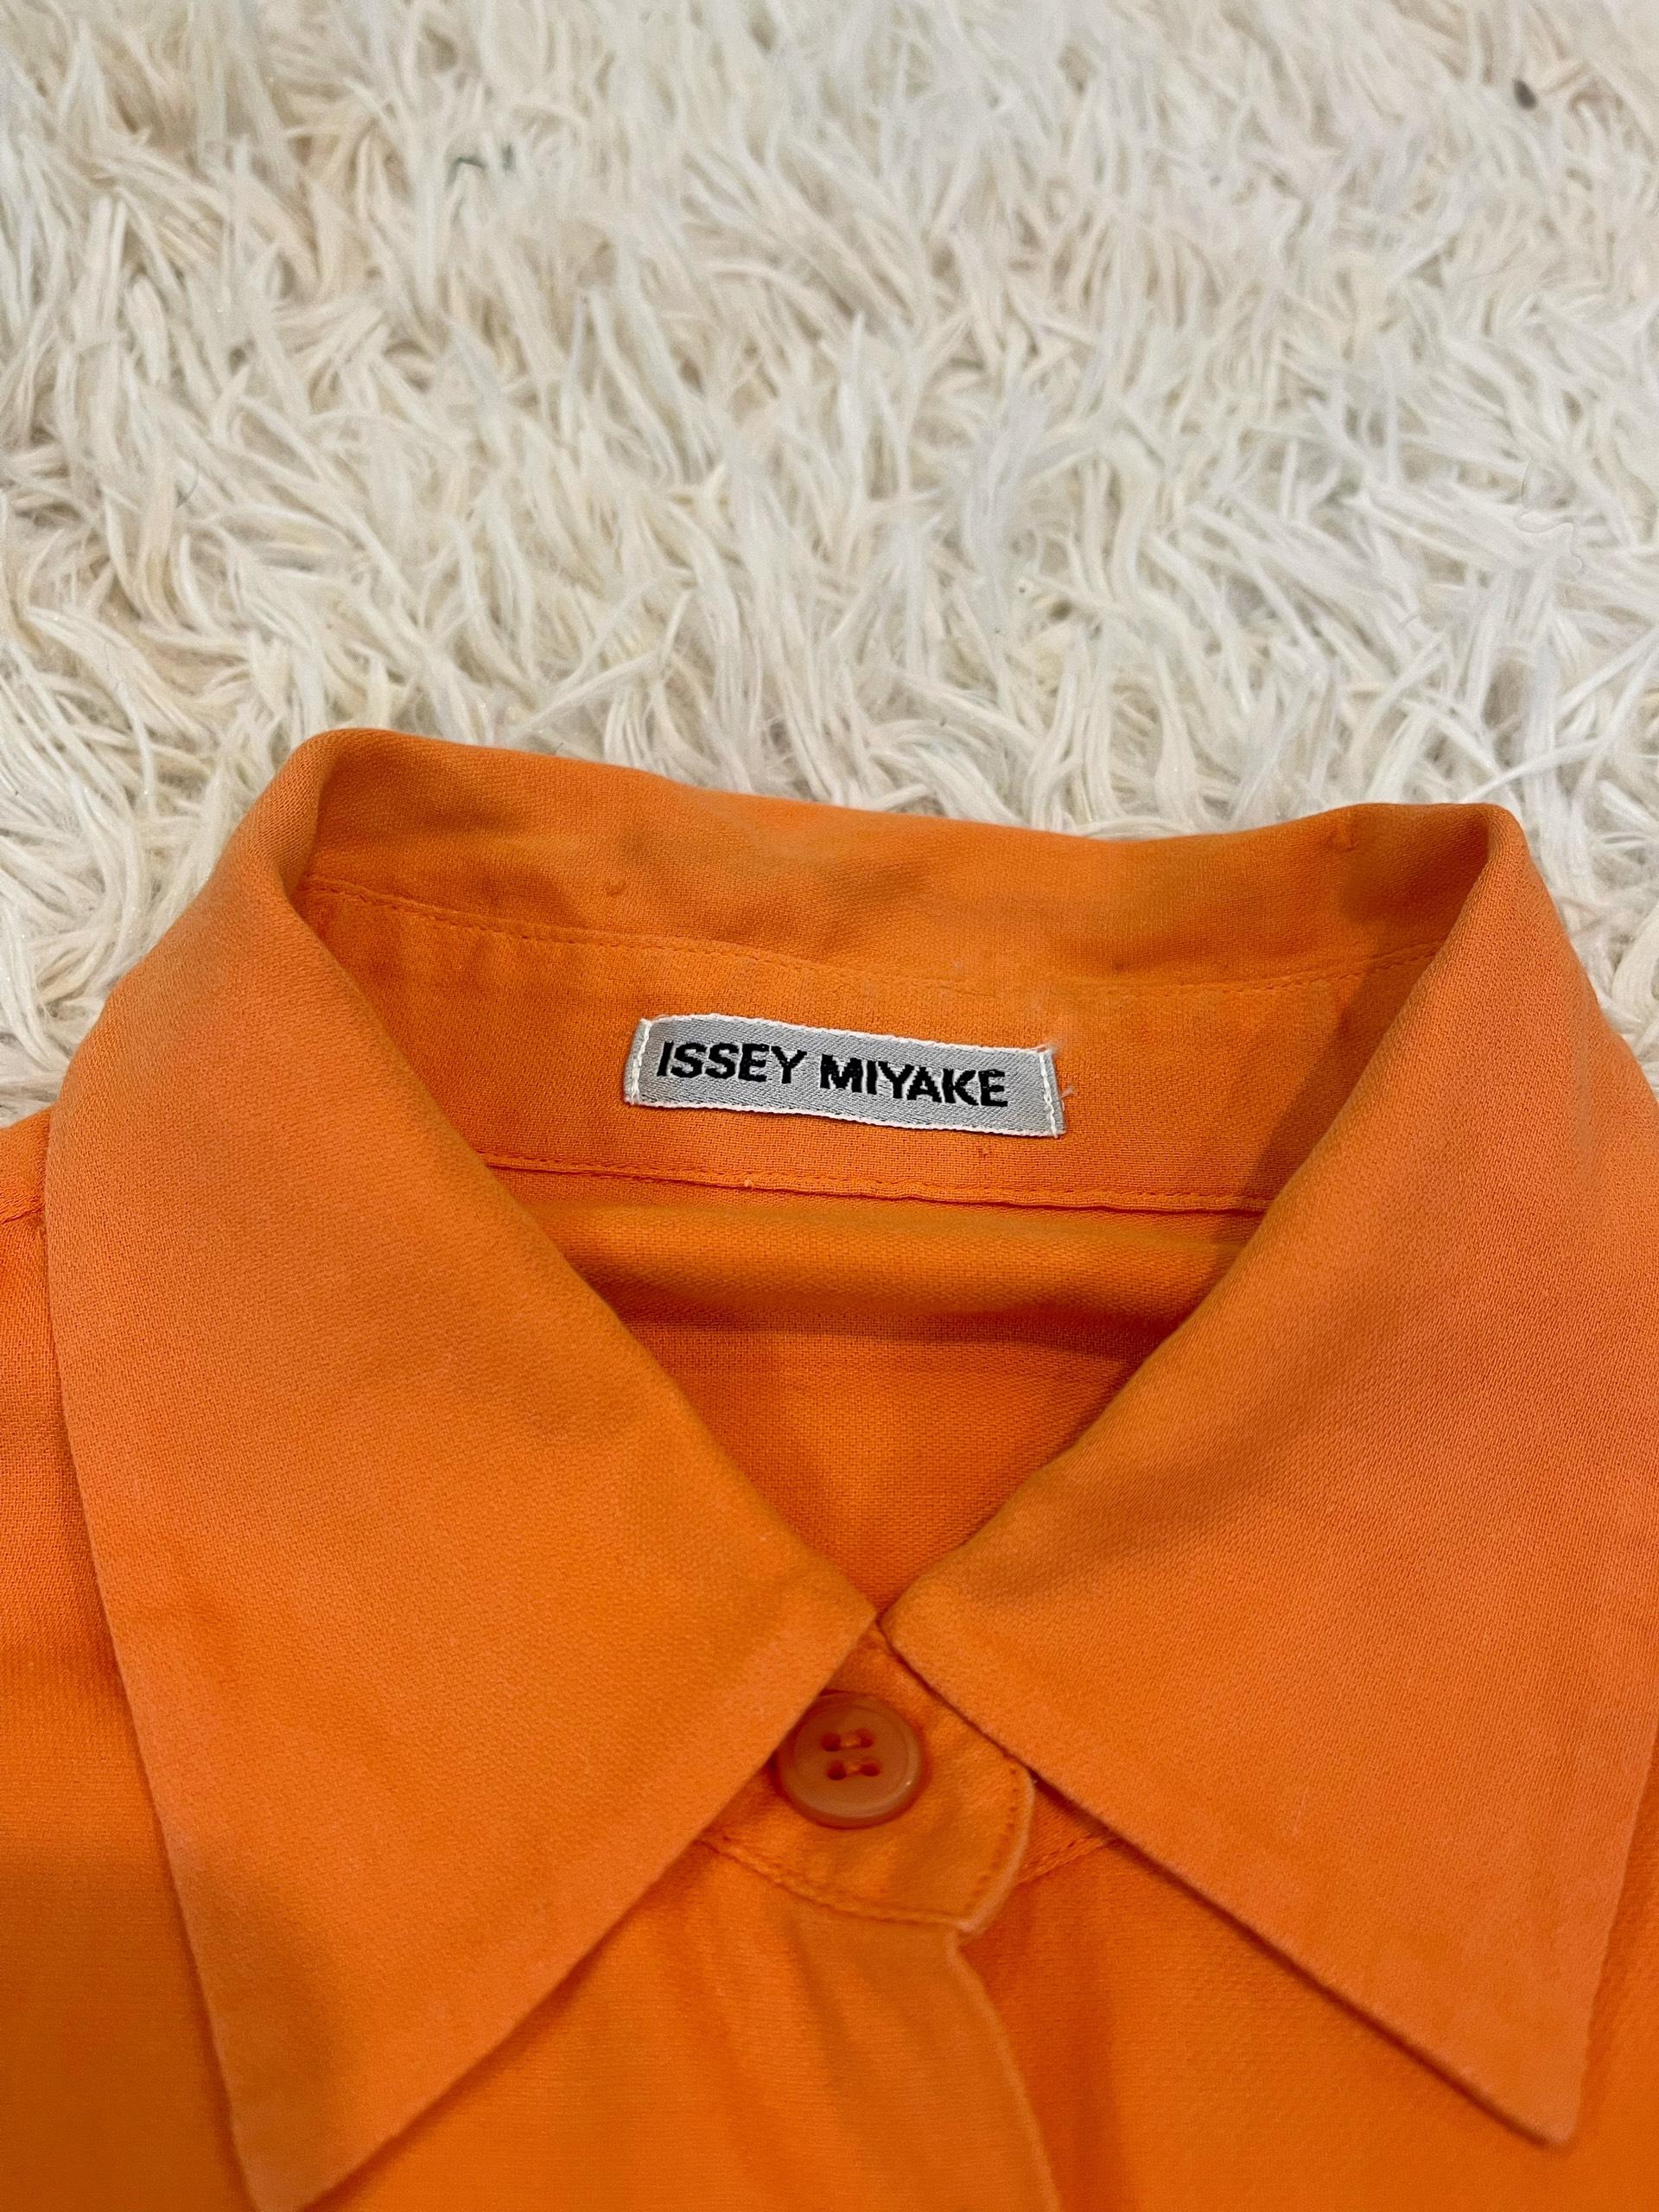 Issey Miyake S/S1991 Chinese Shirt For Sale 3